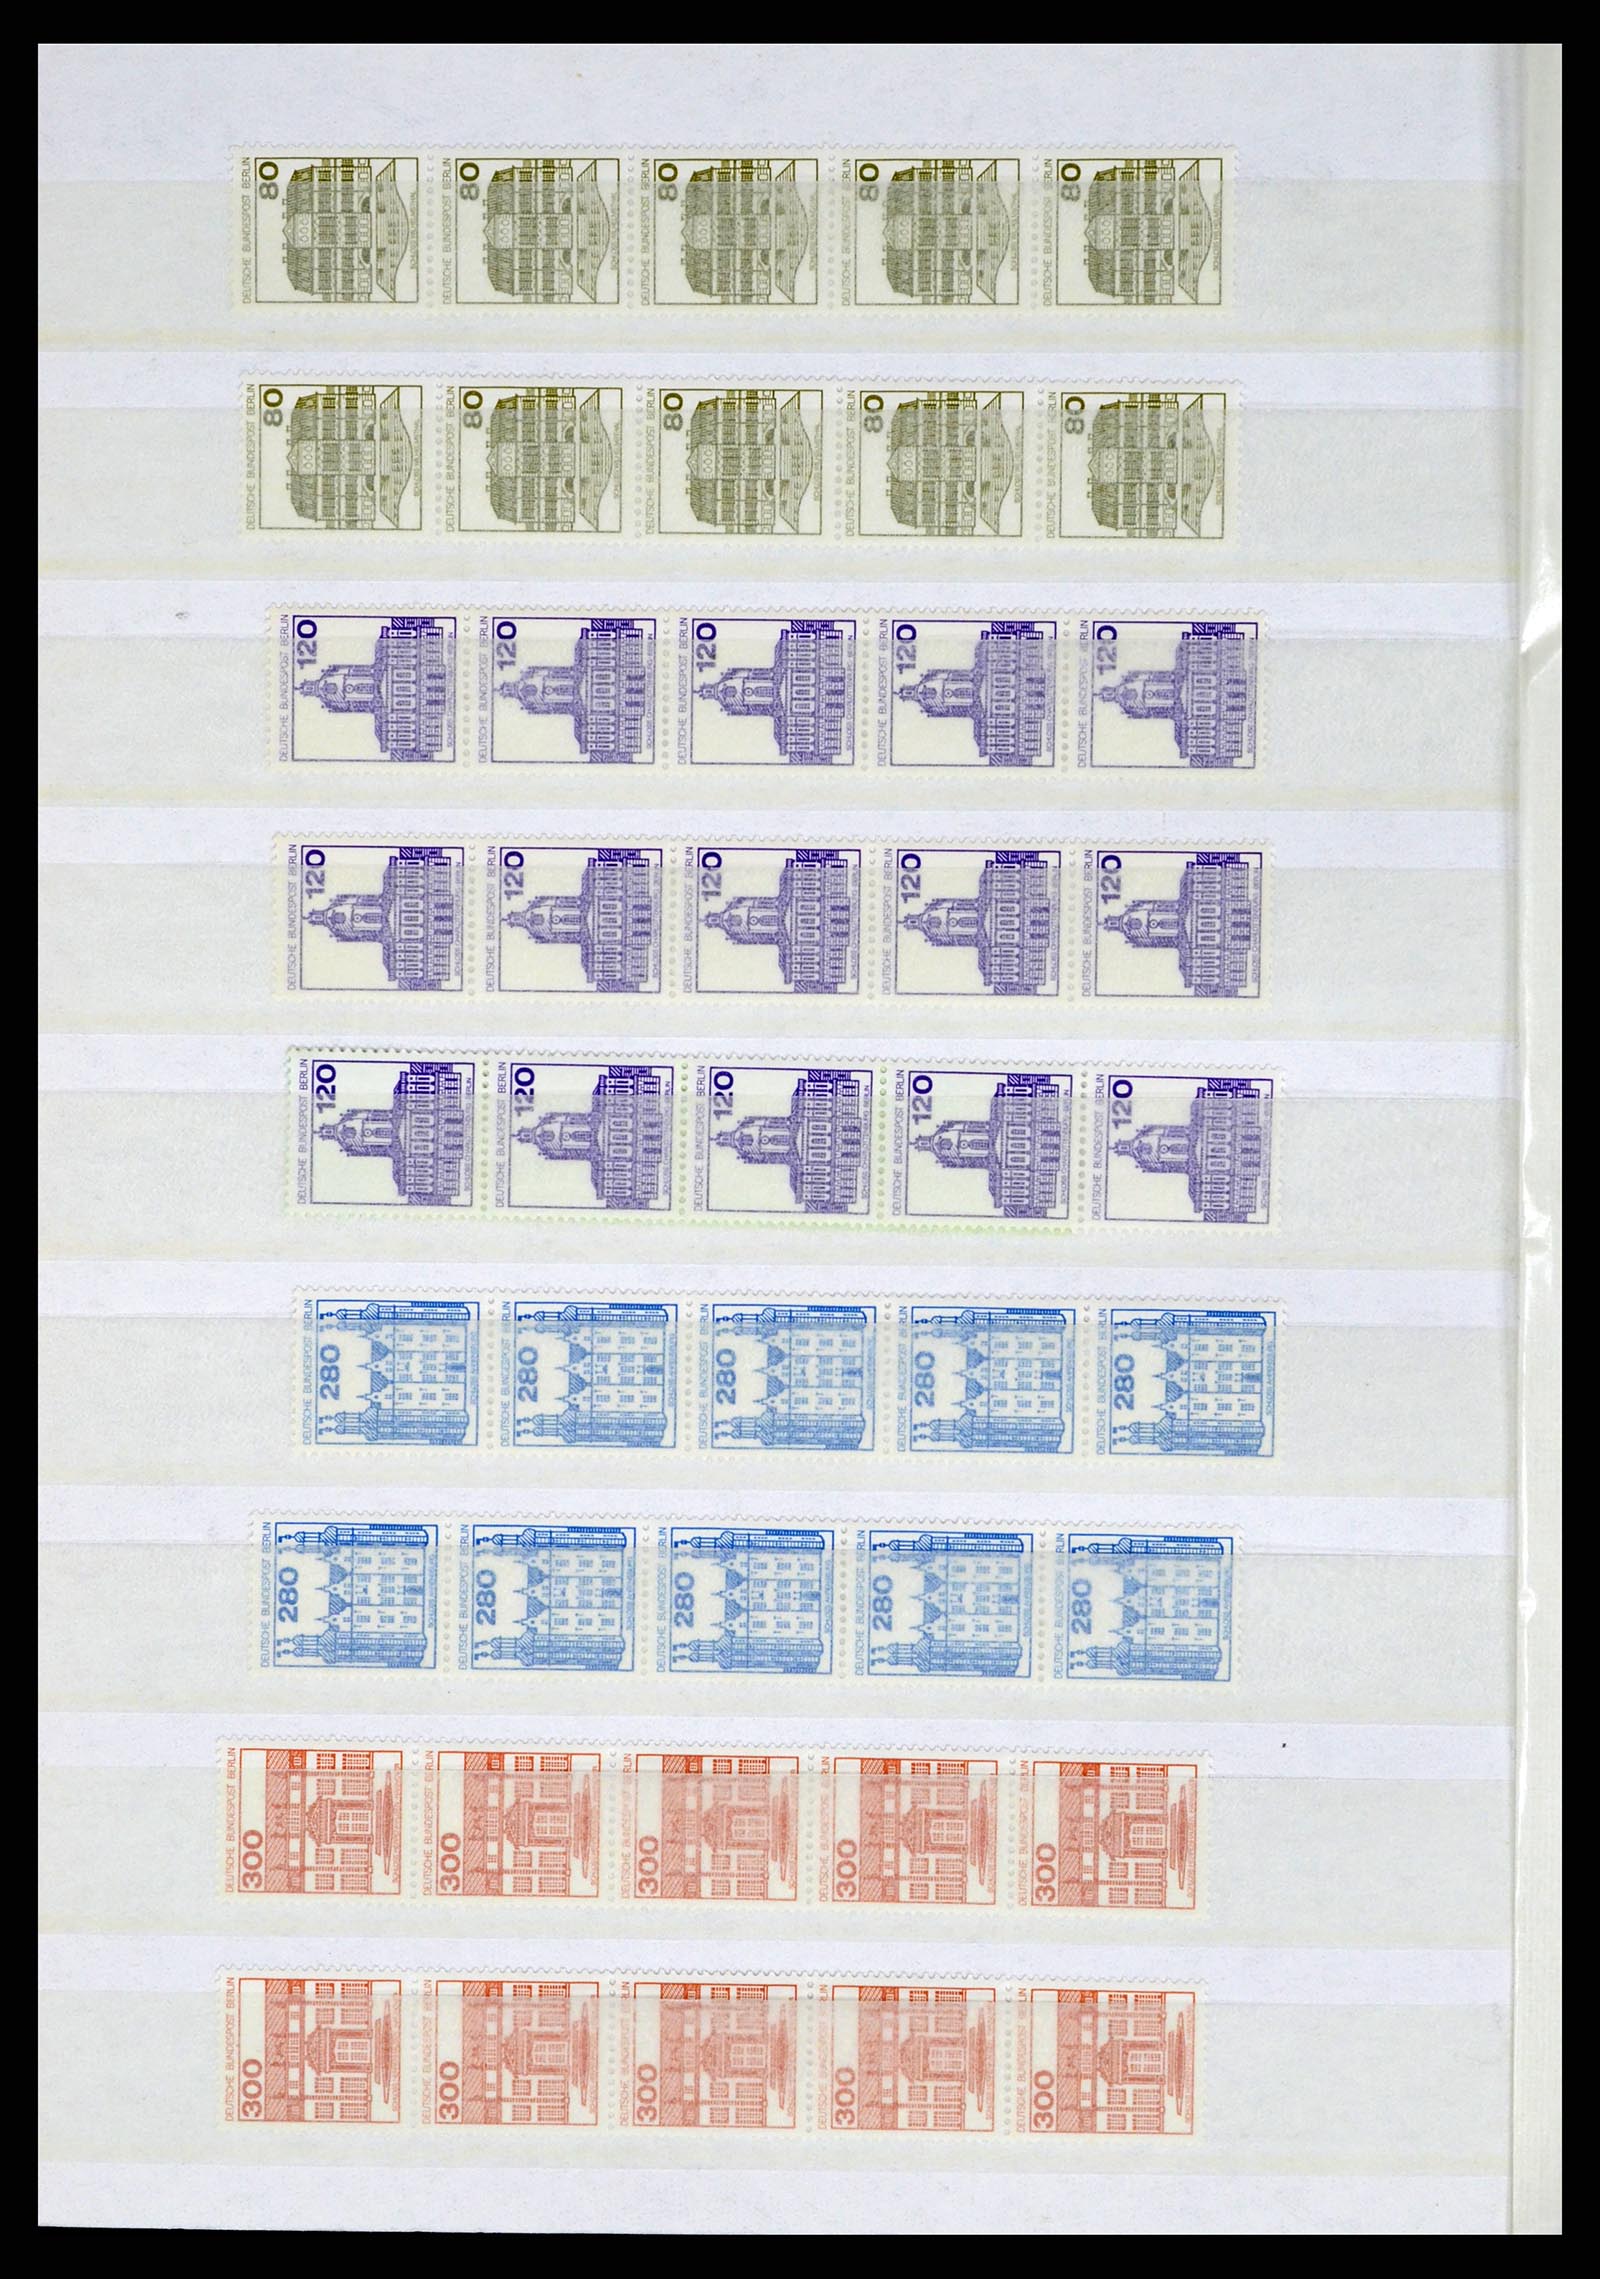 37354 089 - Stamp collection 37354 Bundespost and Berlin 1955-2000.